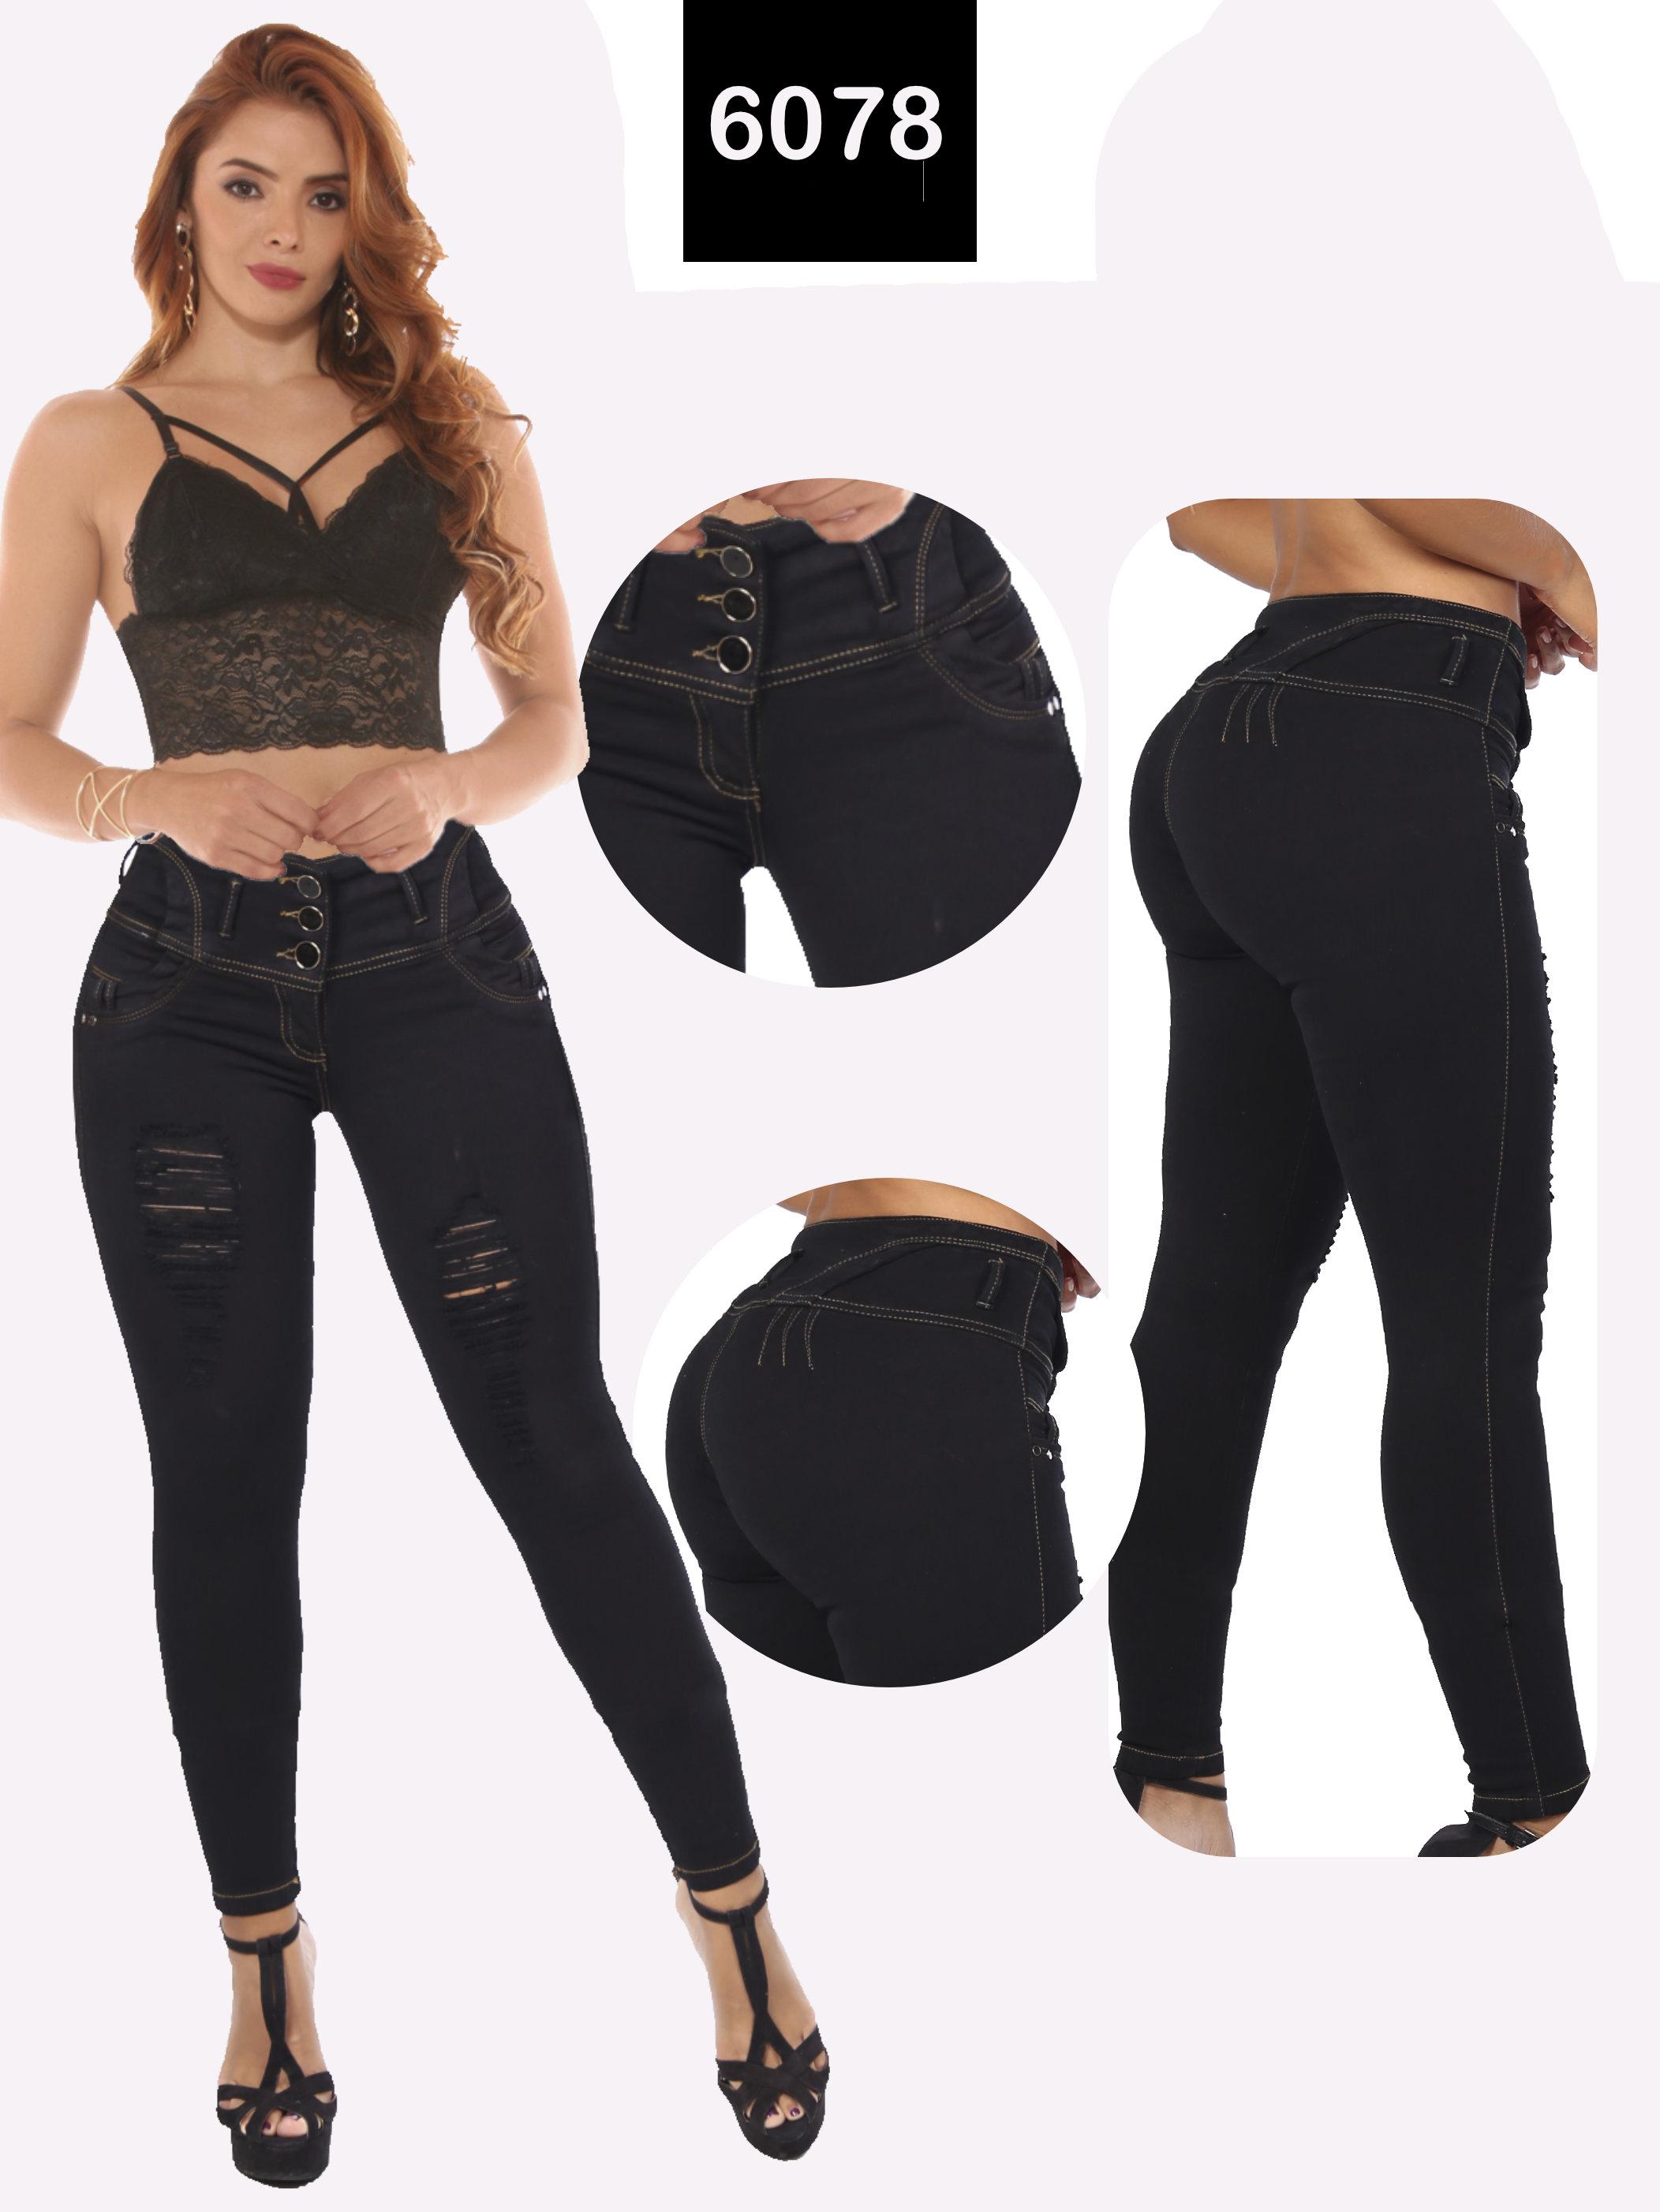 Jeans for Lady Without Back Pockets Push Up Effect and 3 Button High Waistband